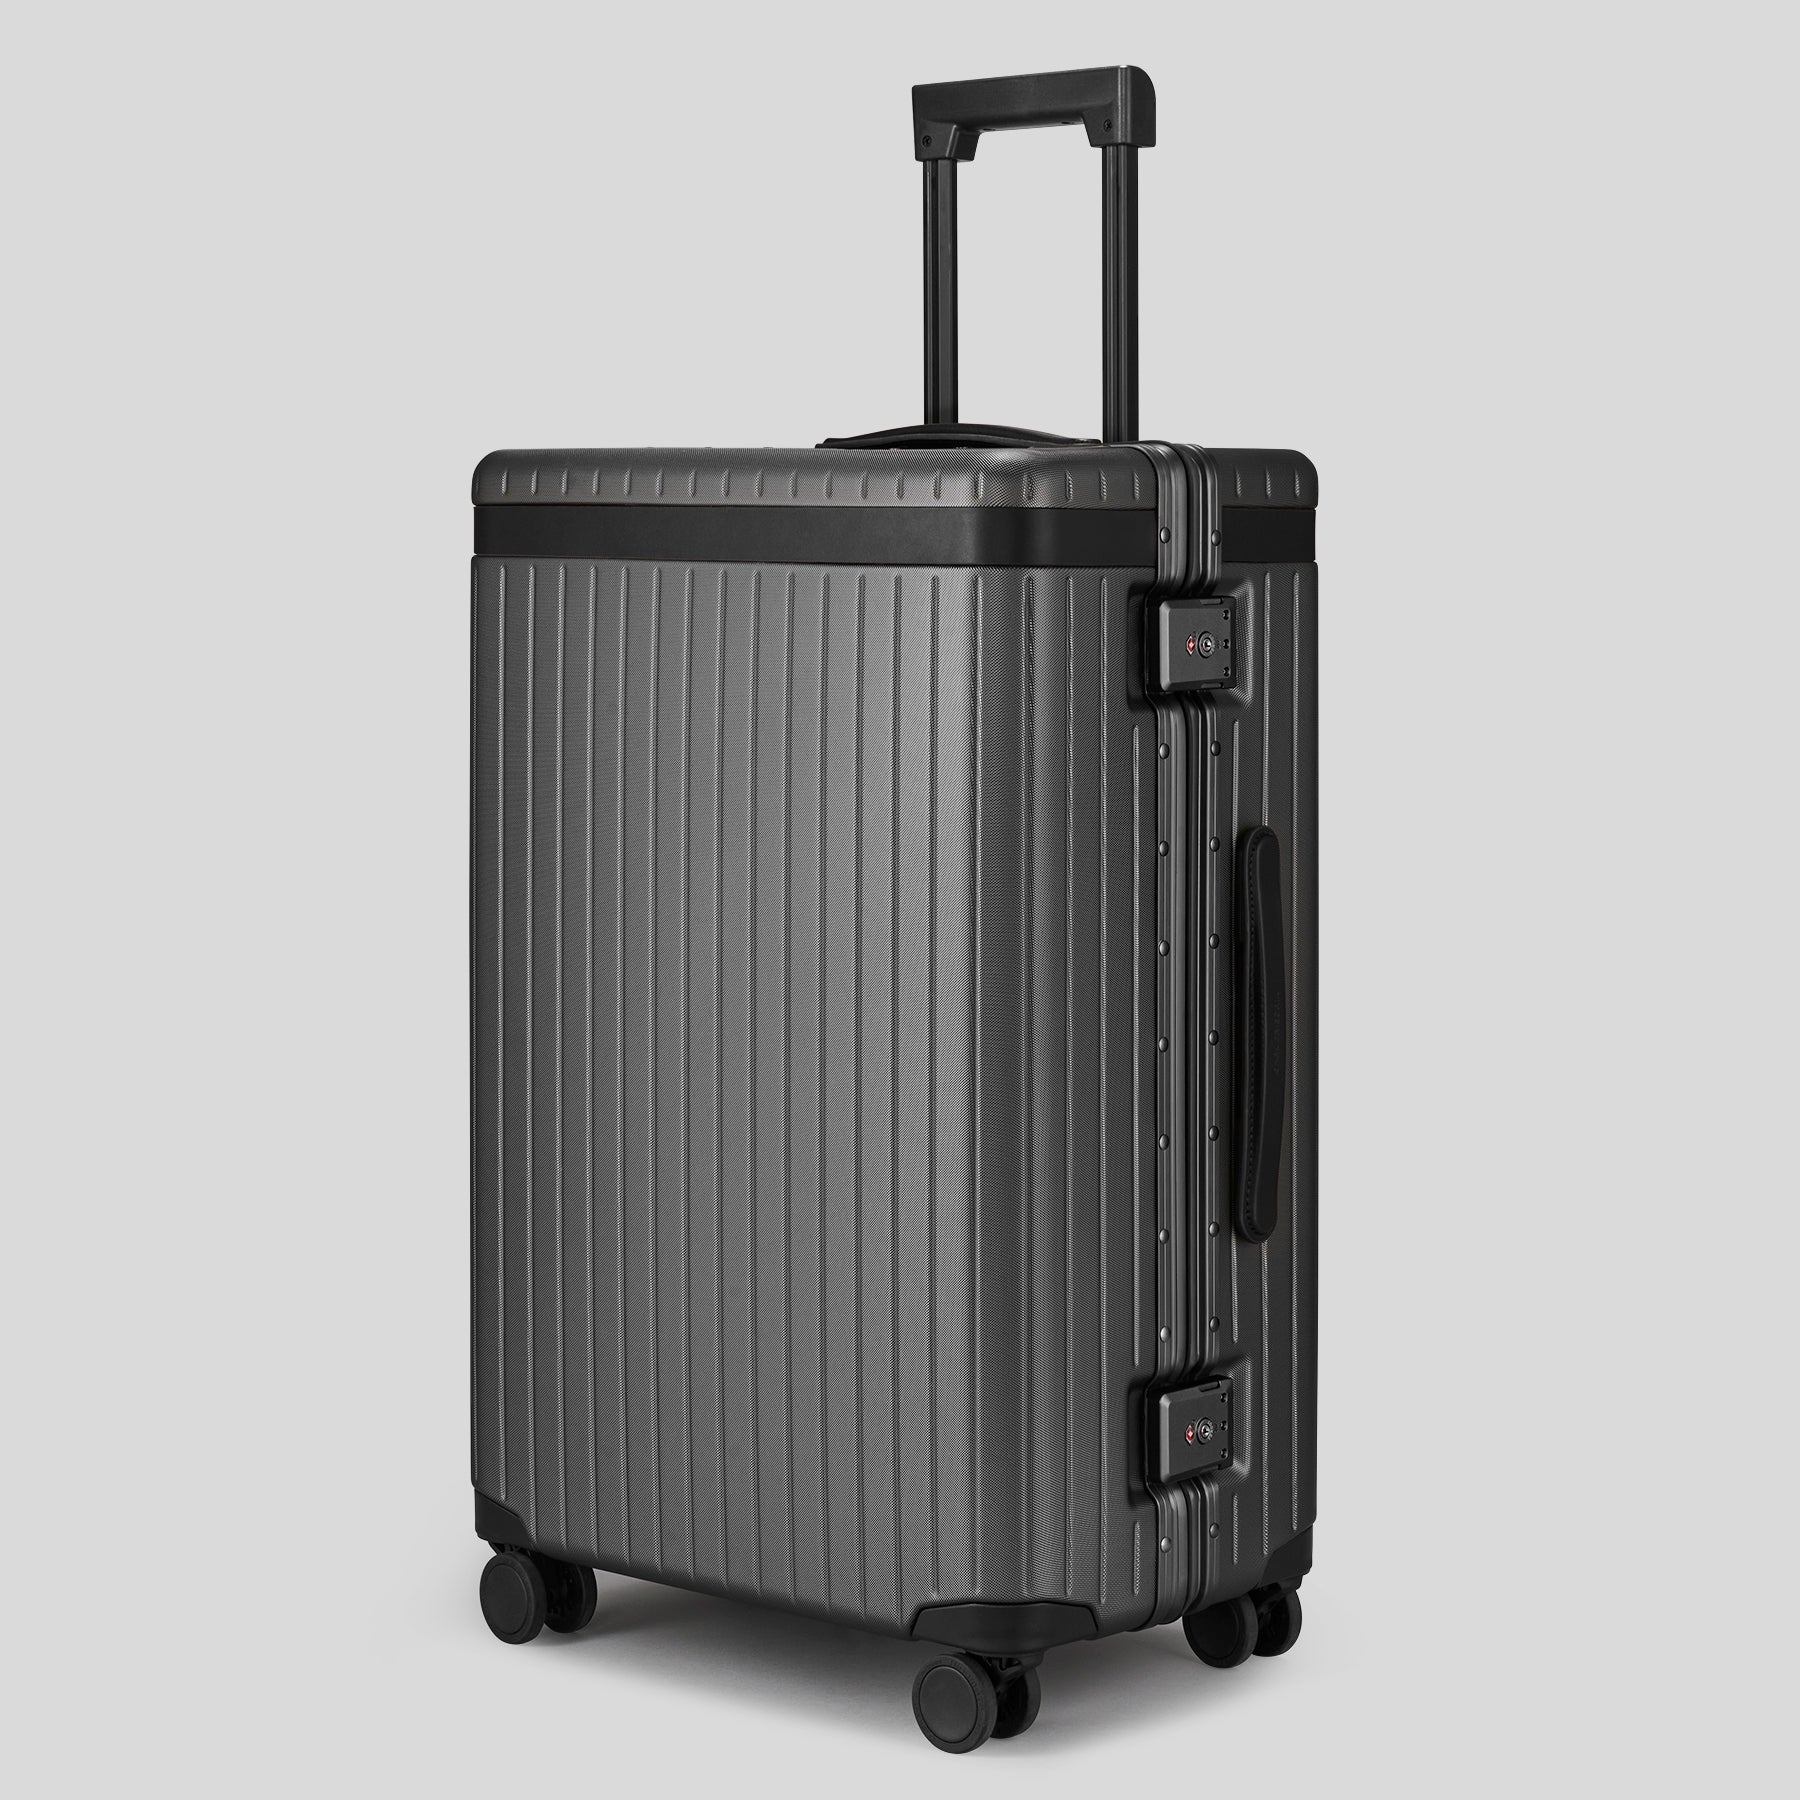 The Check-in - Return Grey / Black / Dotted Large grey polycarbonate suitcase - Fair Condition